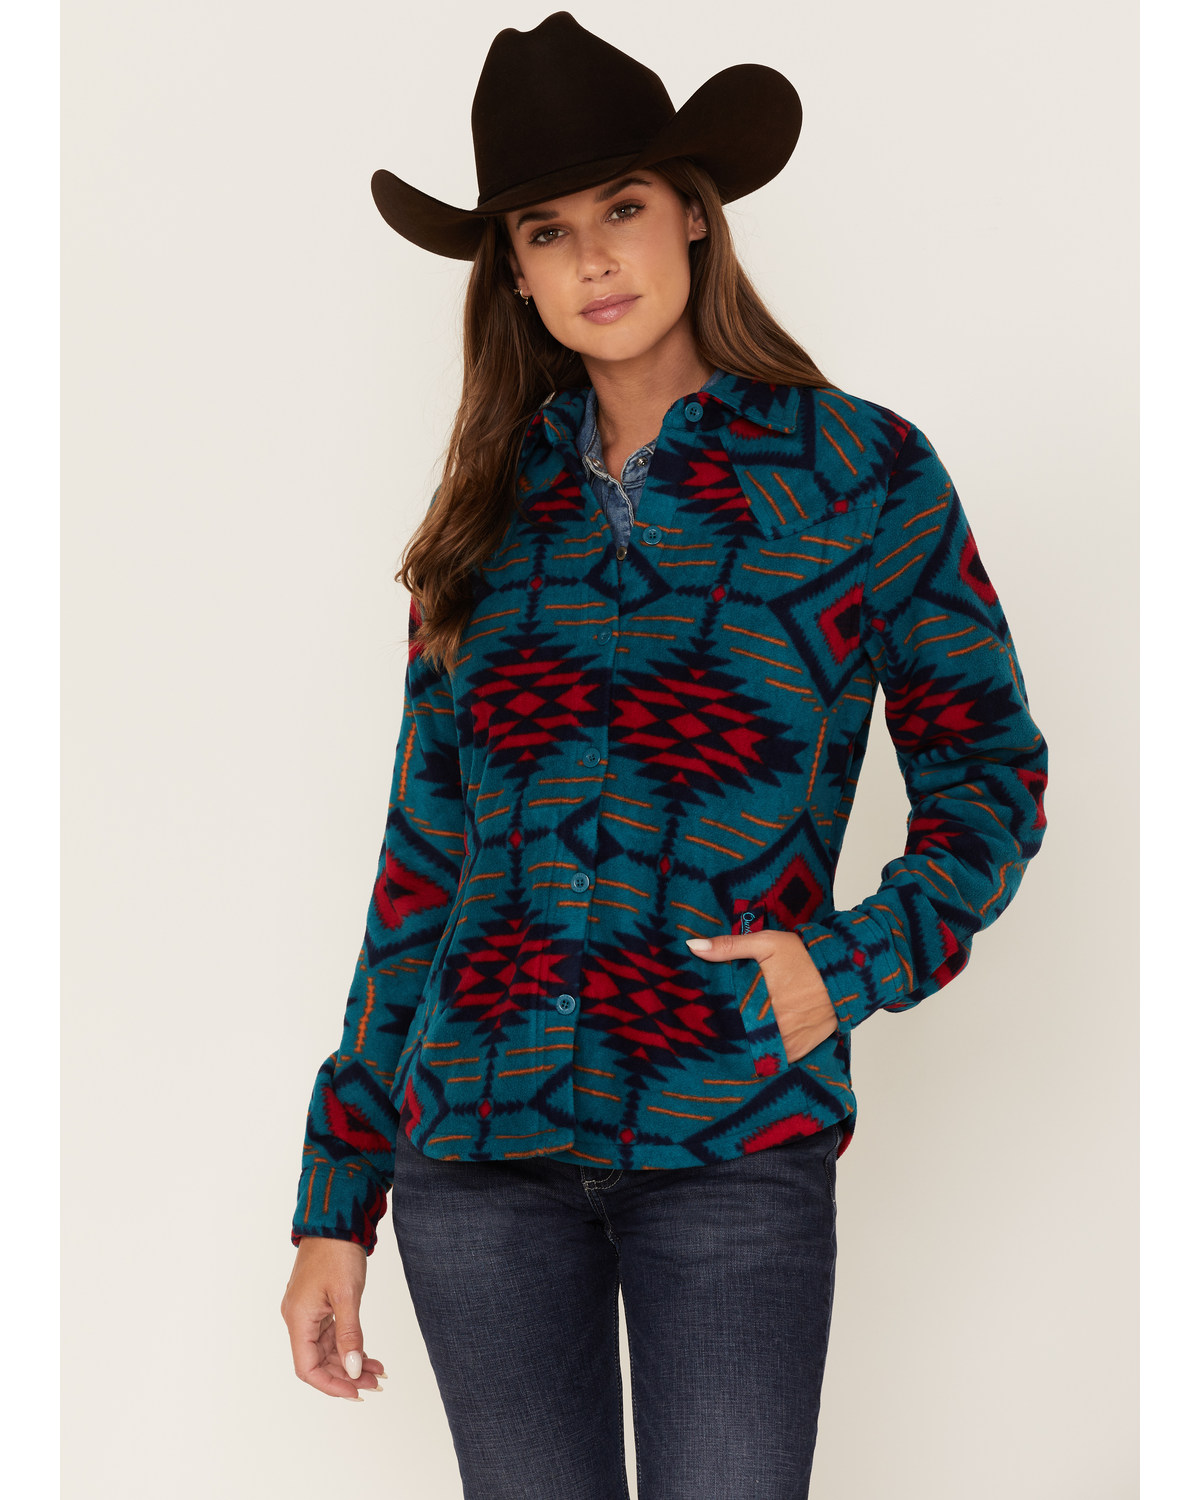 Outback Trading Co Women's Southwestern Print Eleanor Long Sleeve Button-Down Shirt